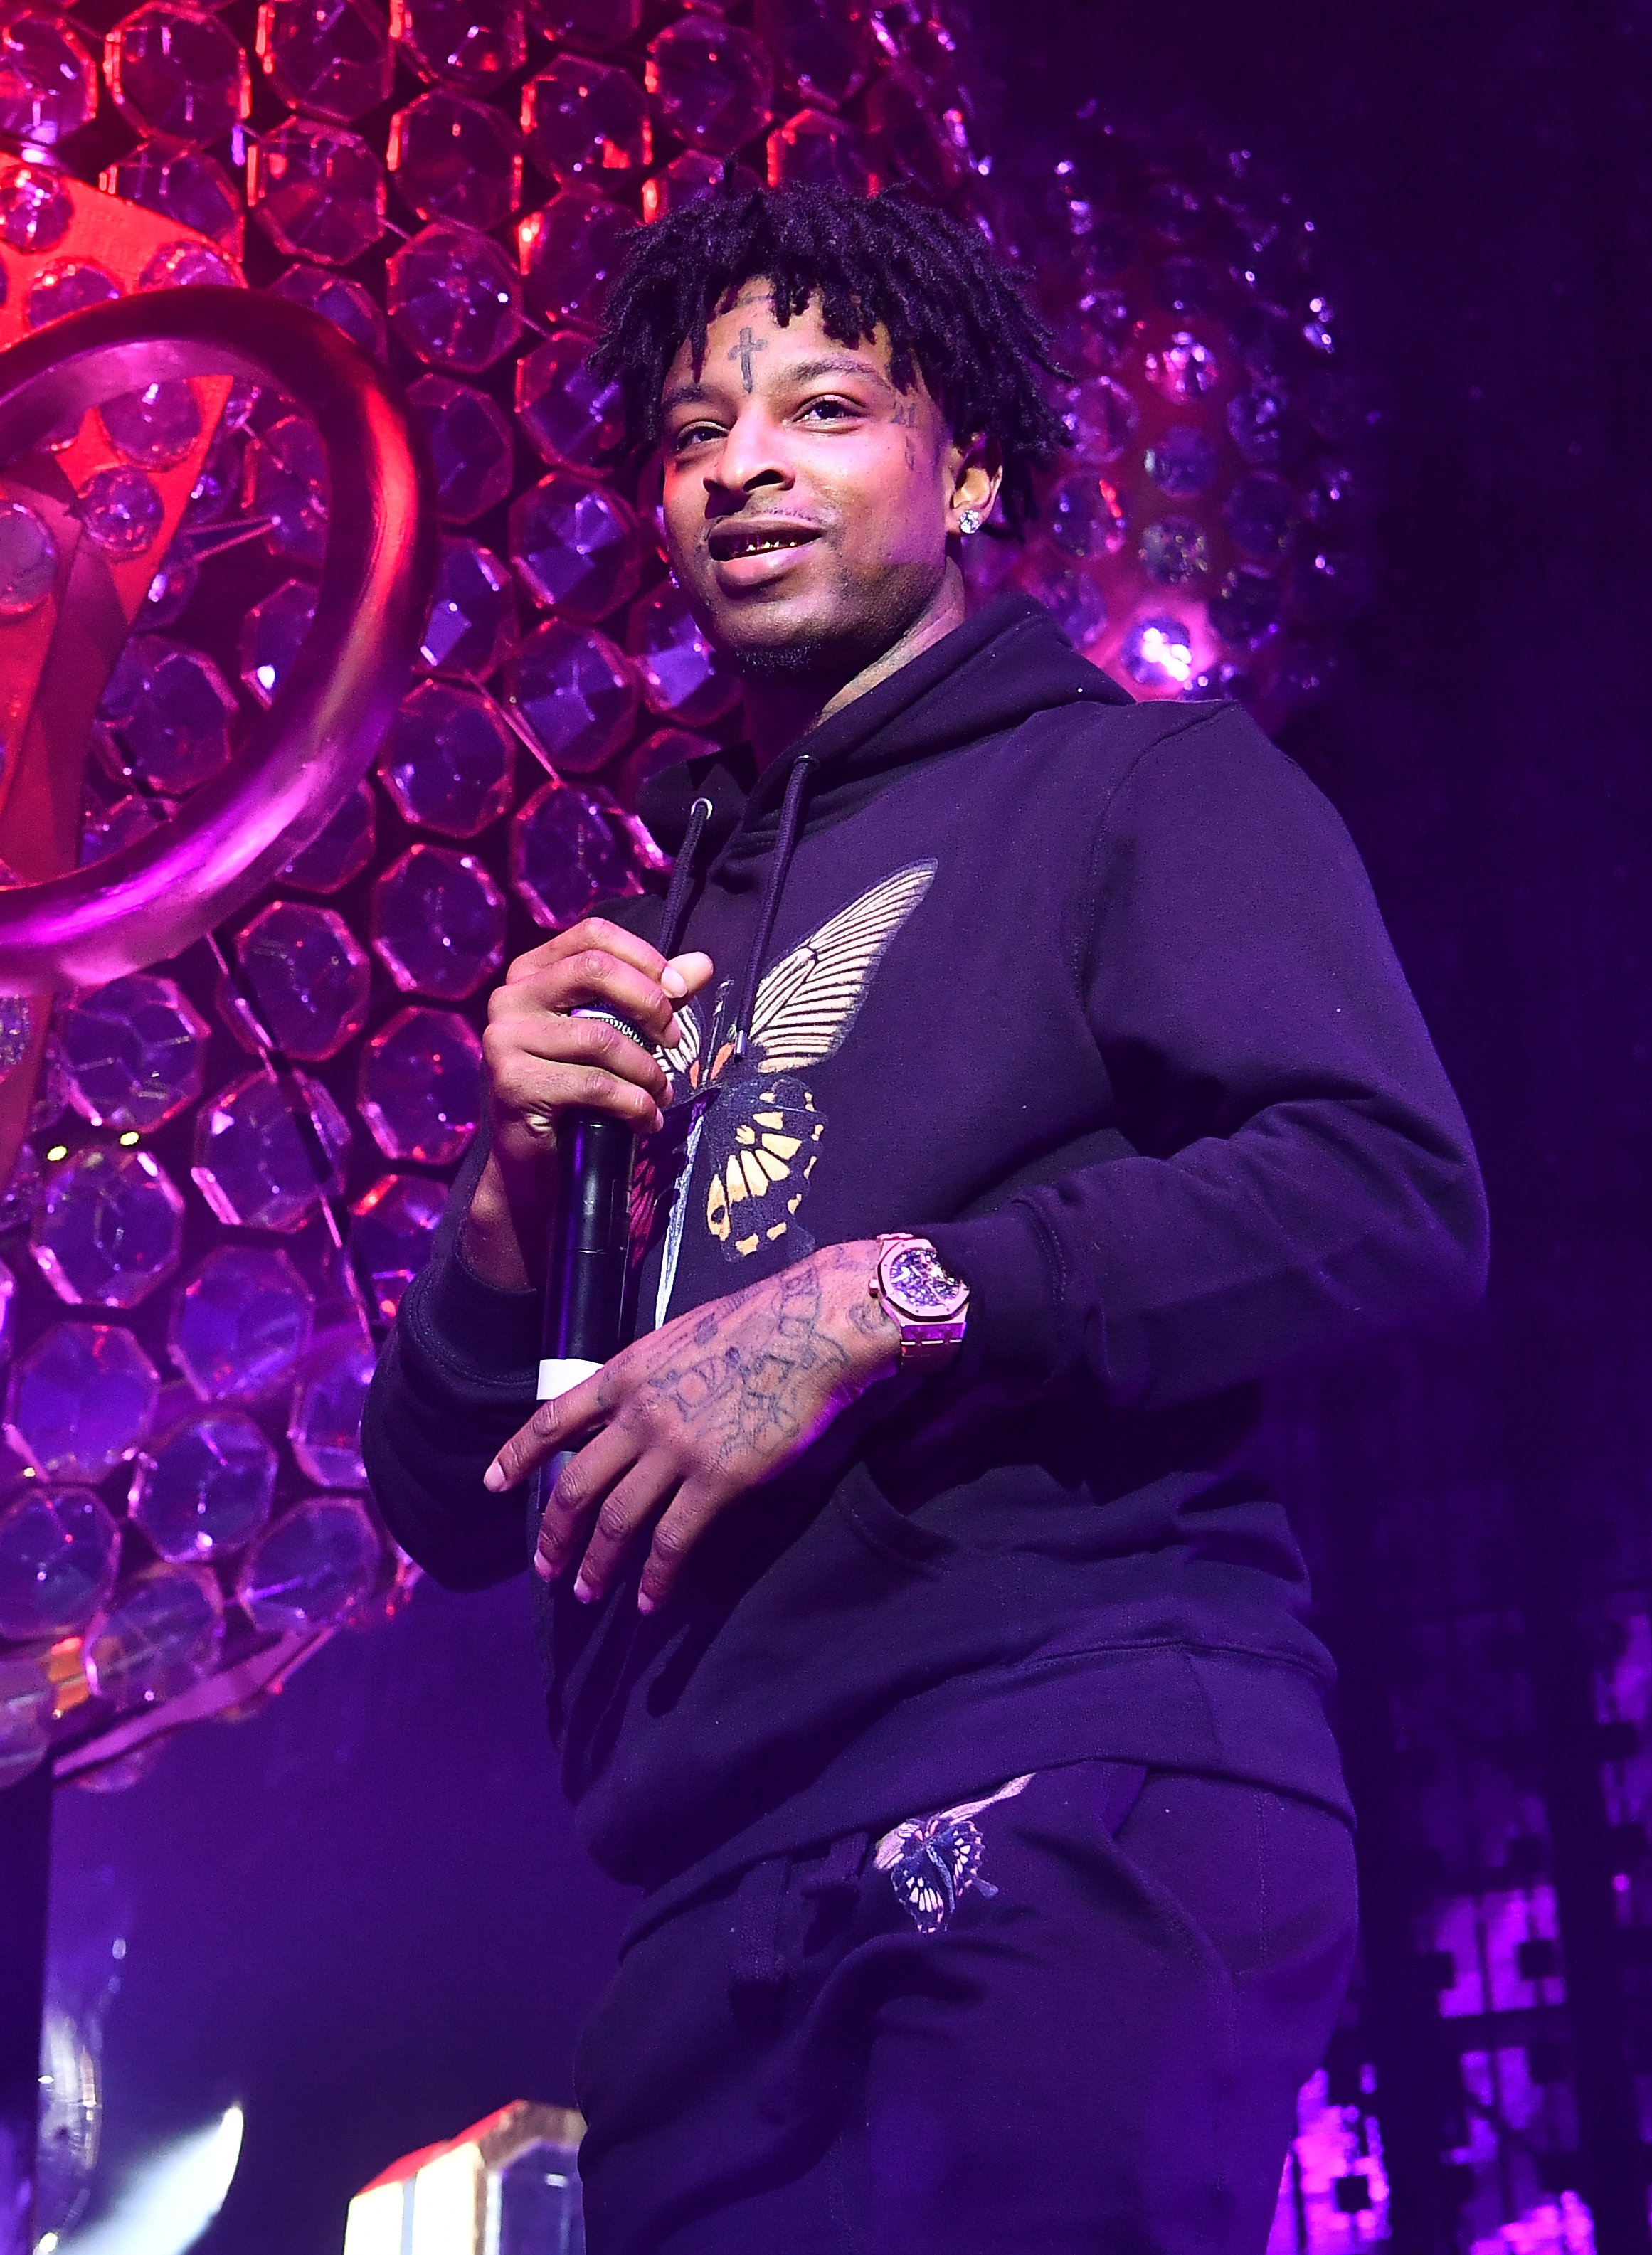 Rapper 21 Savage performs onstage during Lil Baby & Friends concert to promote the new release of Lil Baby's new album "Street Gossip" at Coca-Cola Roxy on November 29, 2018 in Atlanta, Georgia. | Source: Getty Images